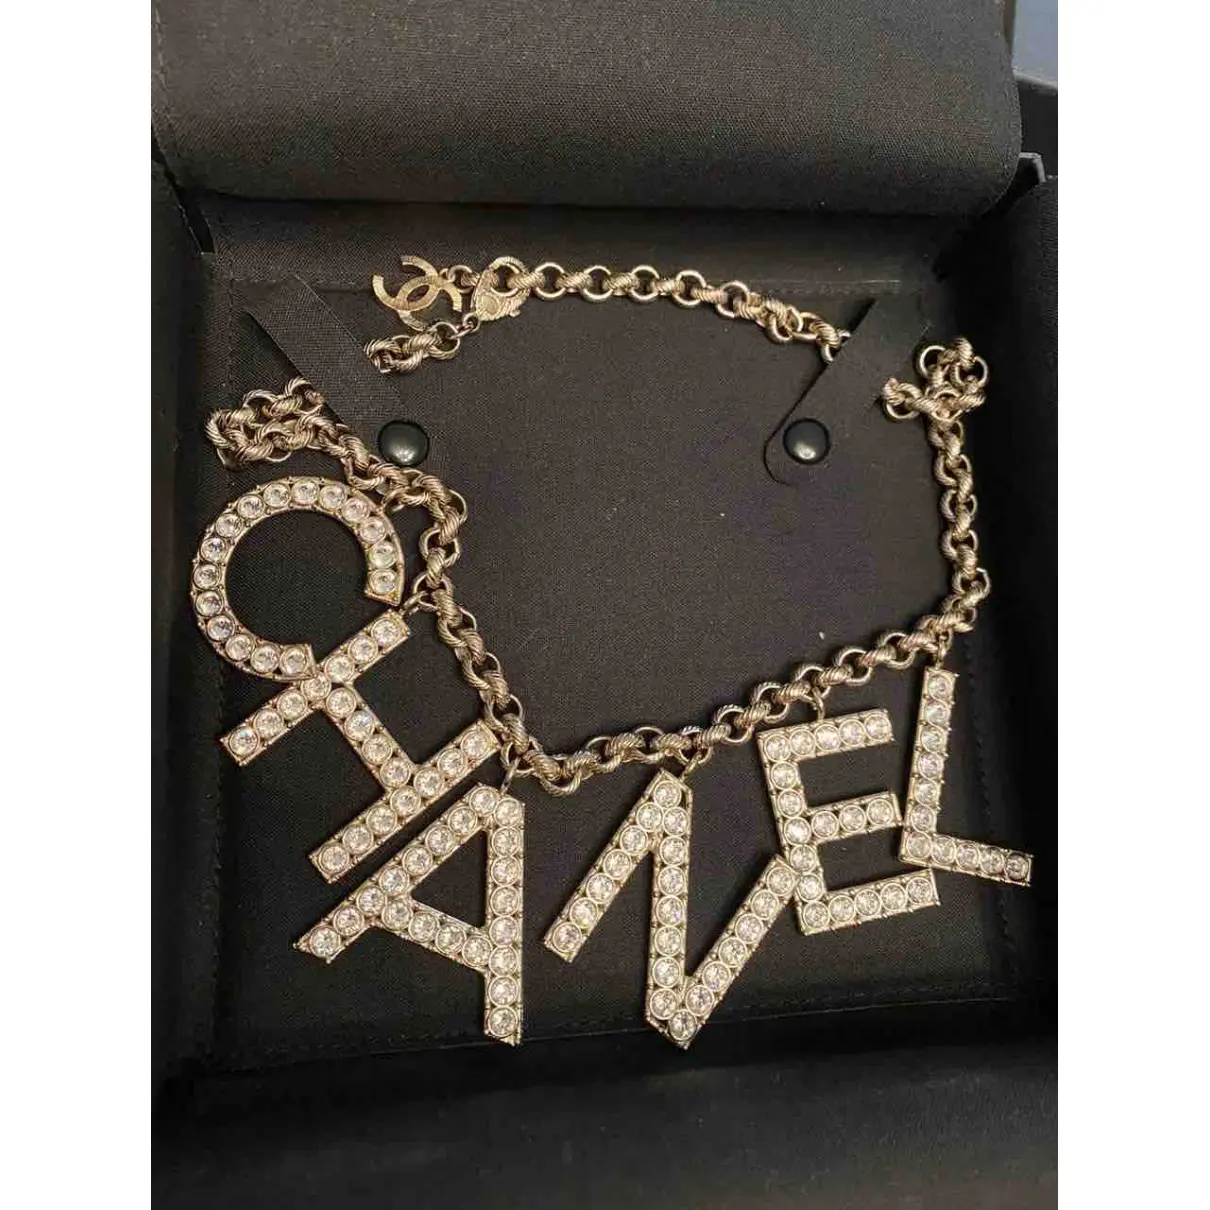 Buy Chanel CHANEL necklace online